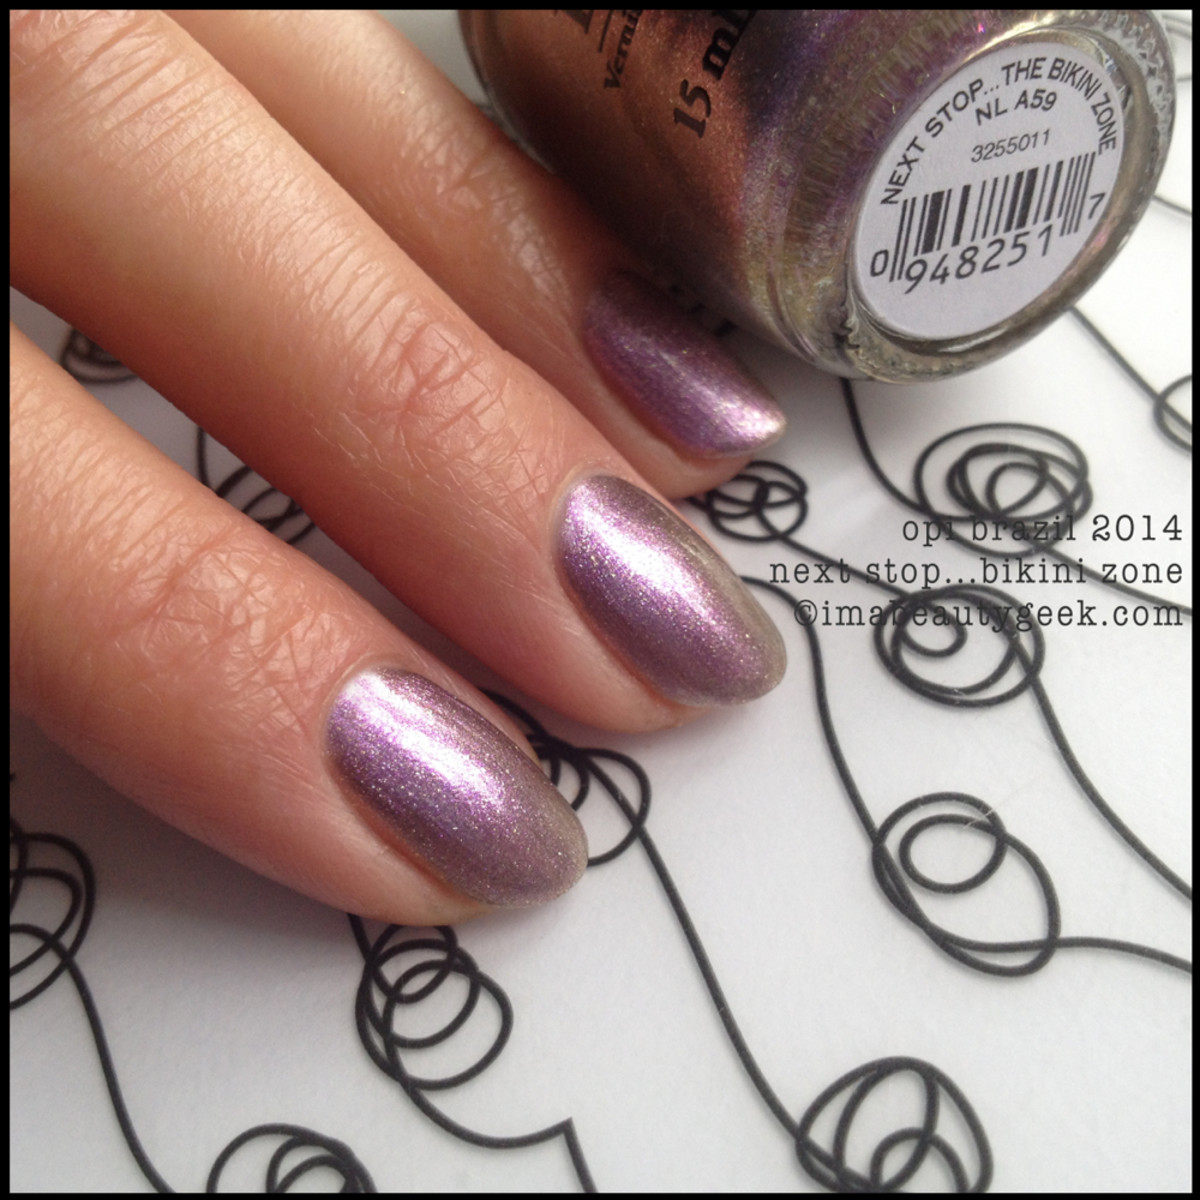 Enchanted Polish August 2014 | From head to foot